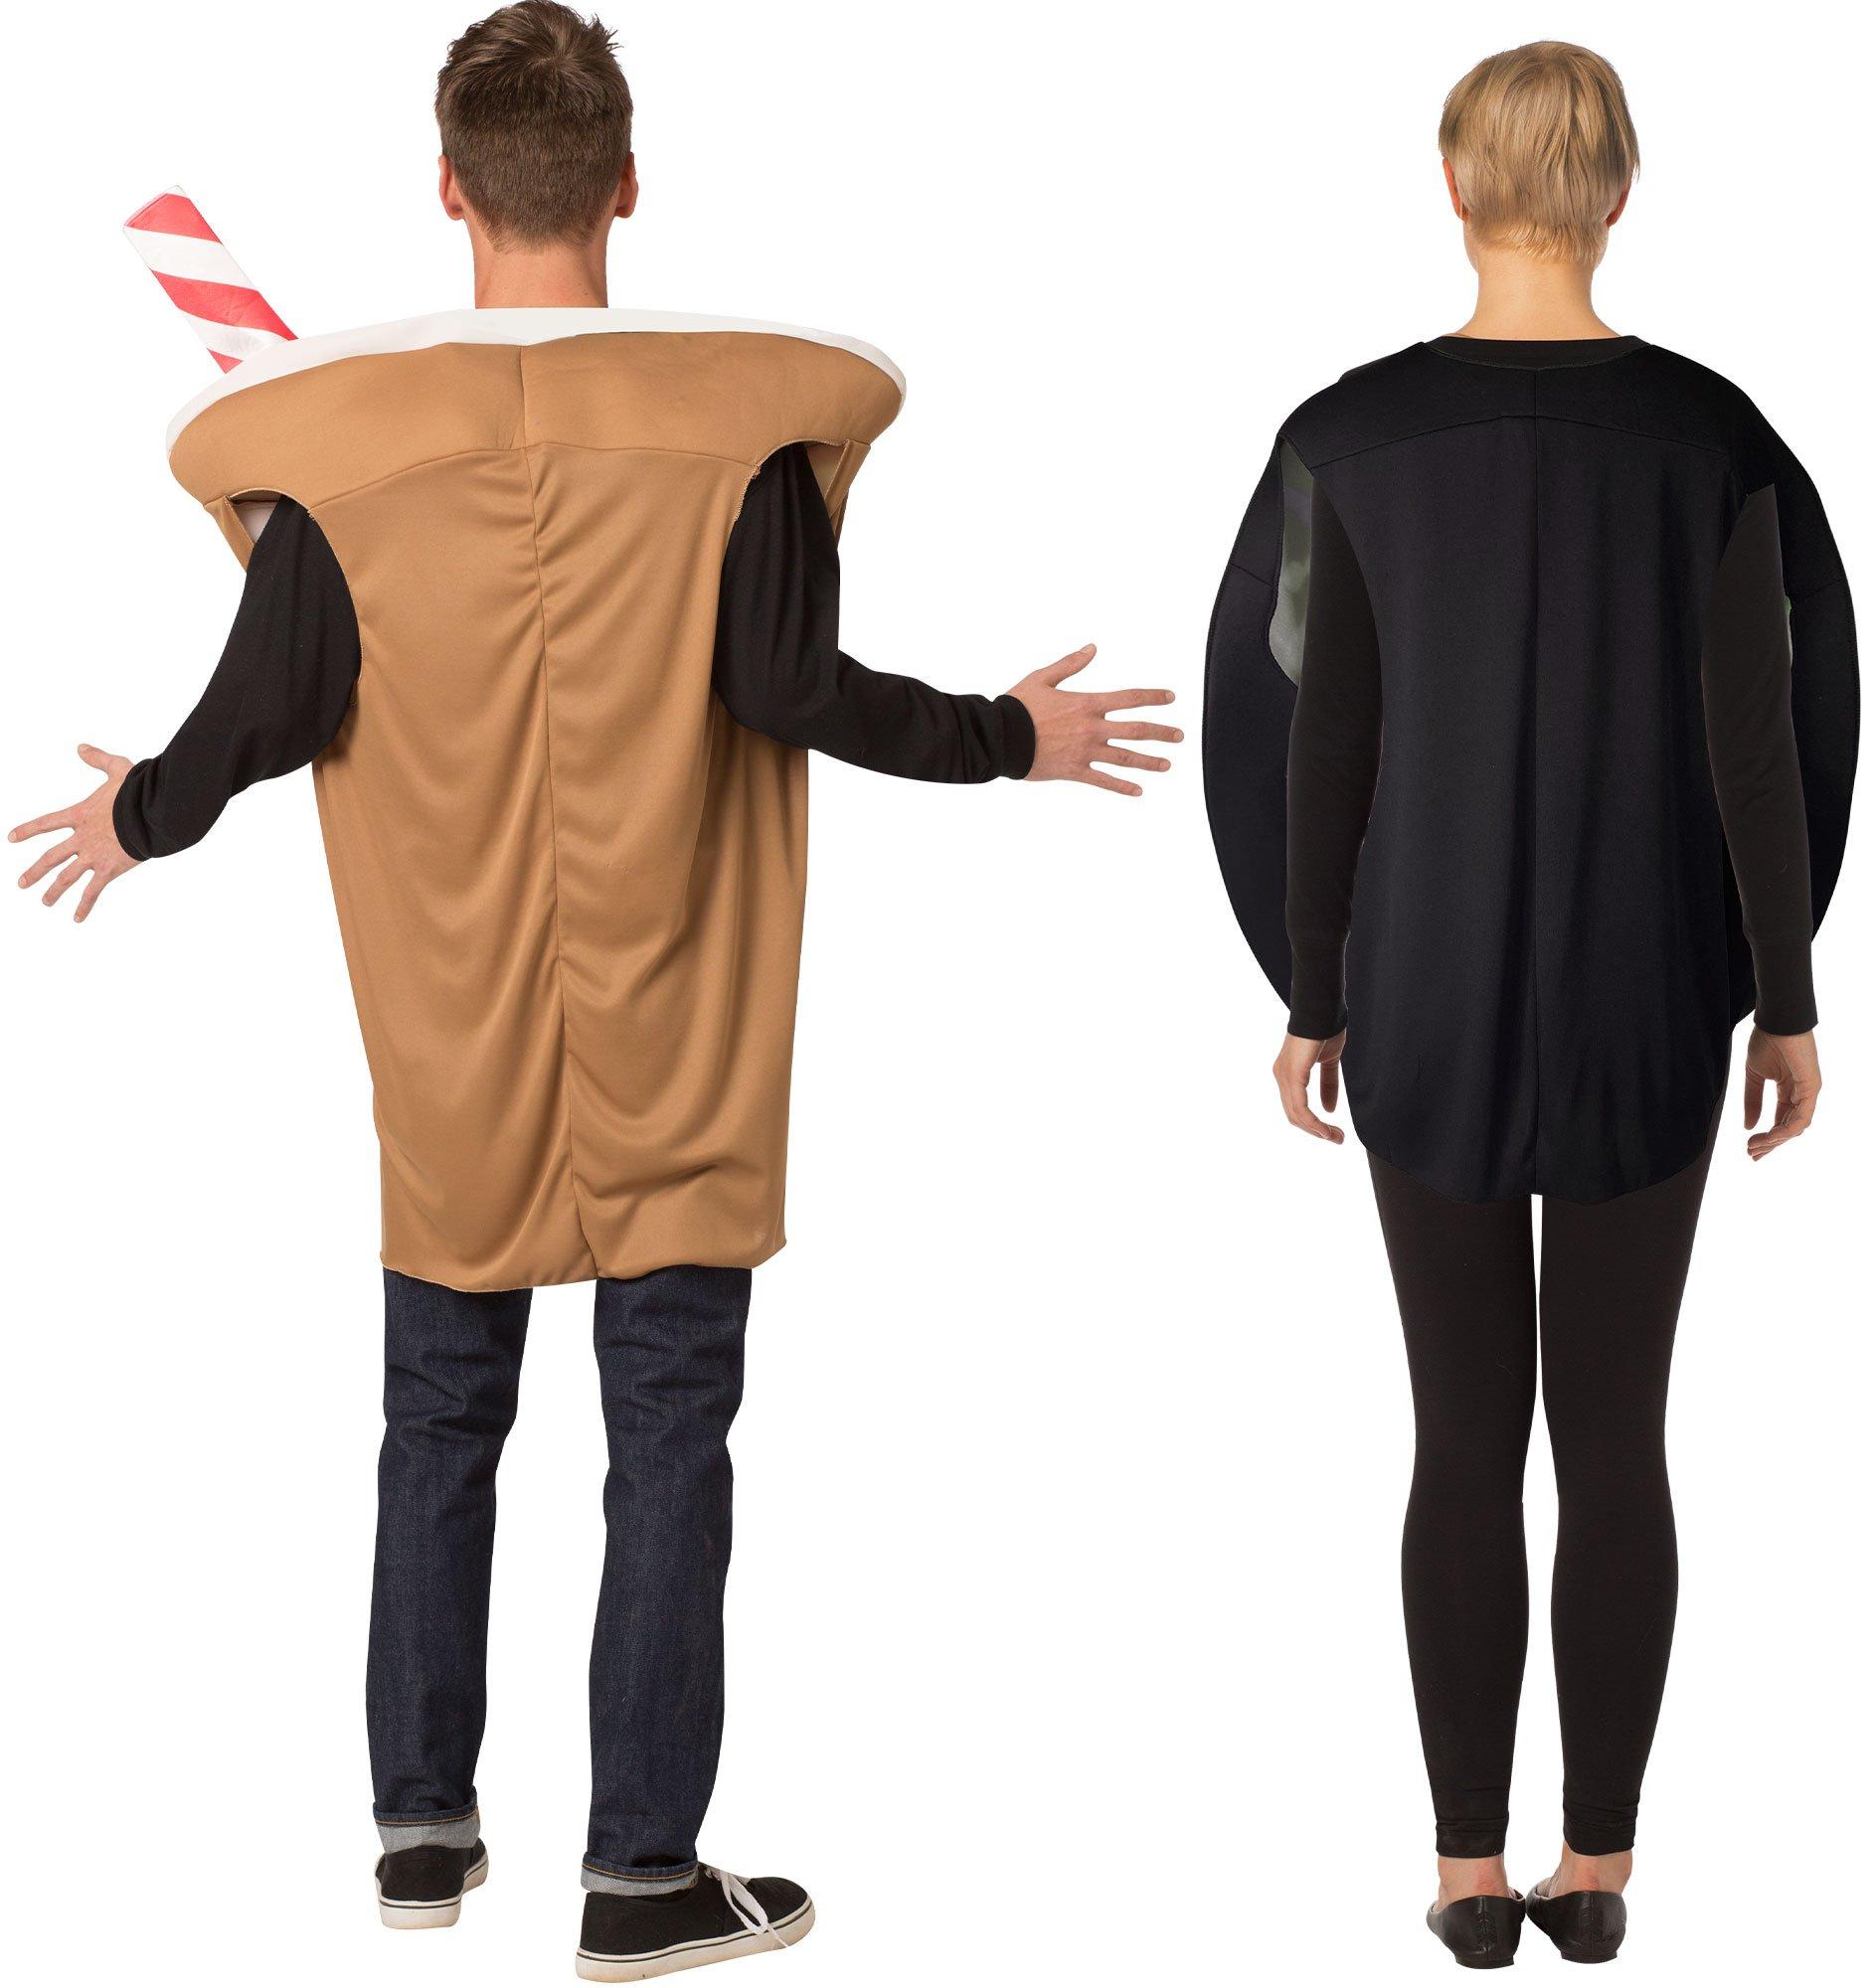 Sprinkle Donut & Cold Brew Coffee Couples Costumes for Adults | Party City